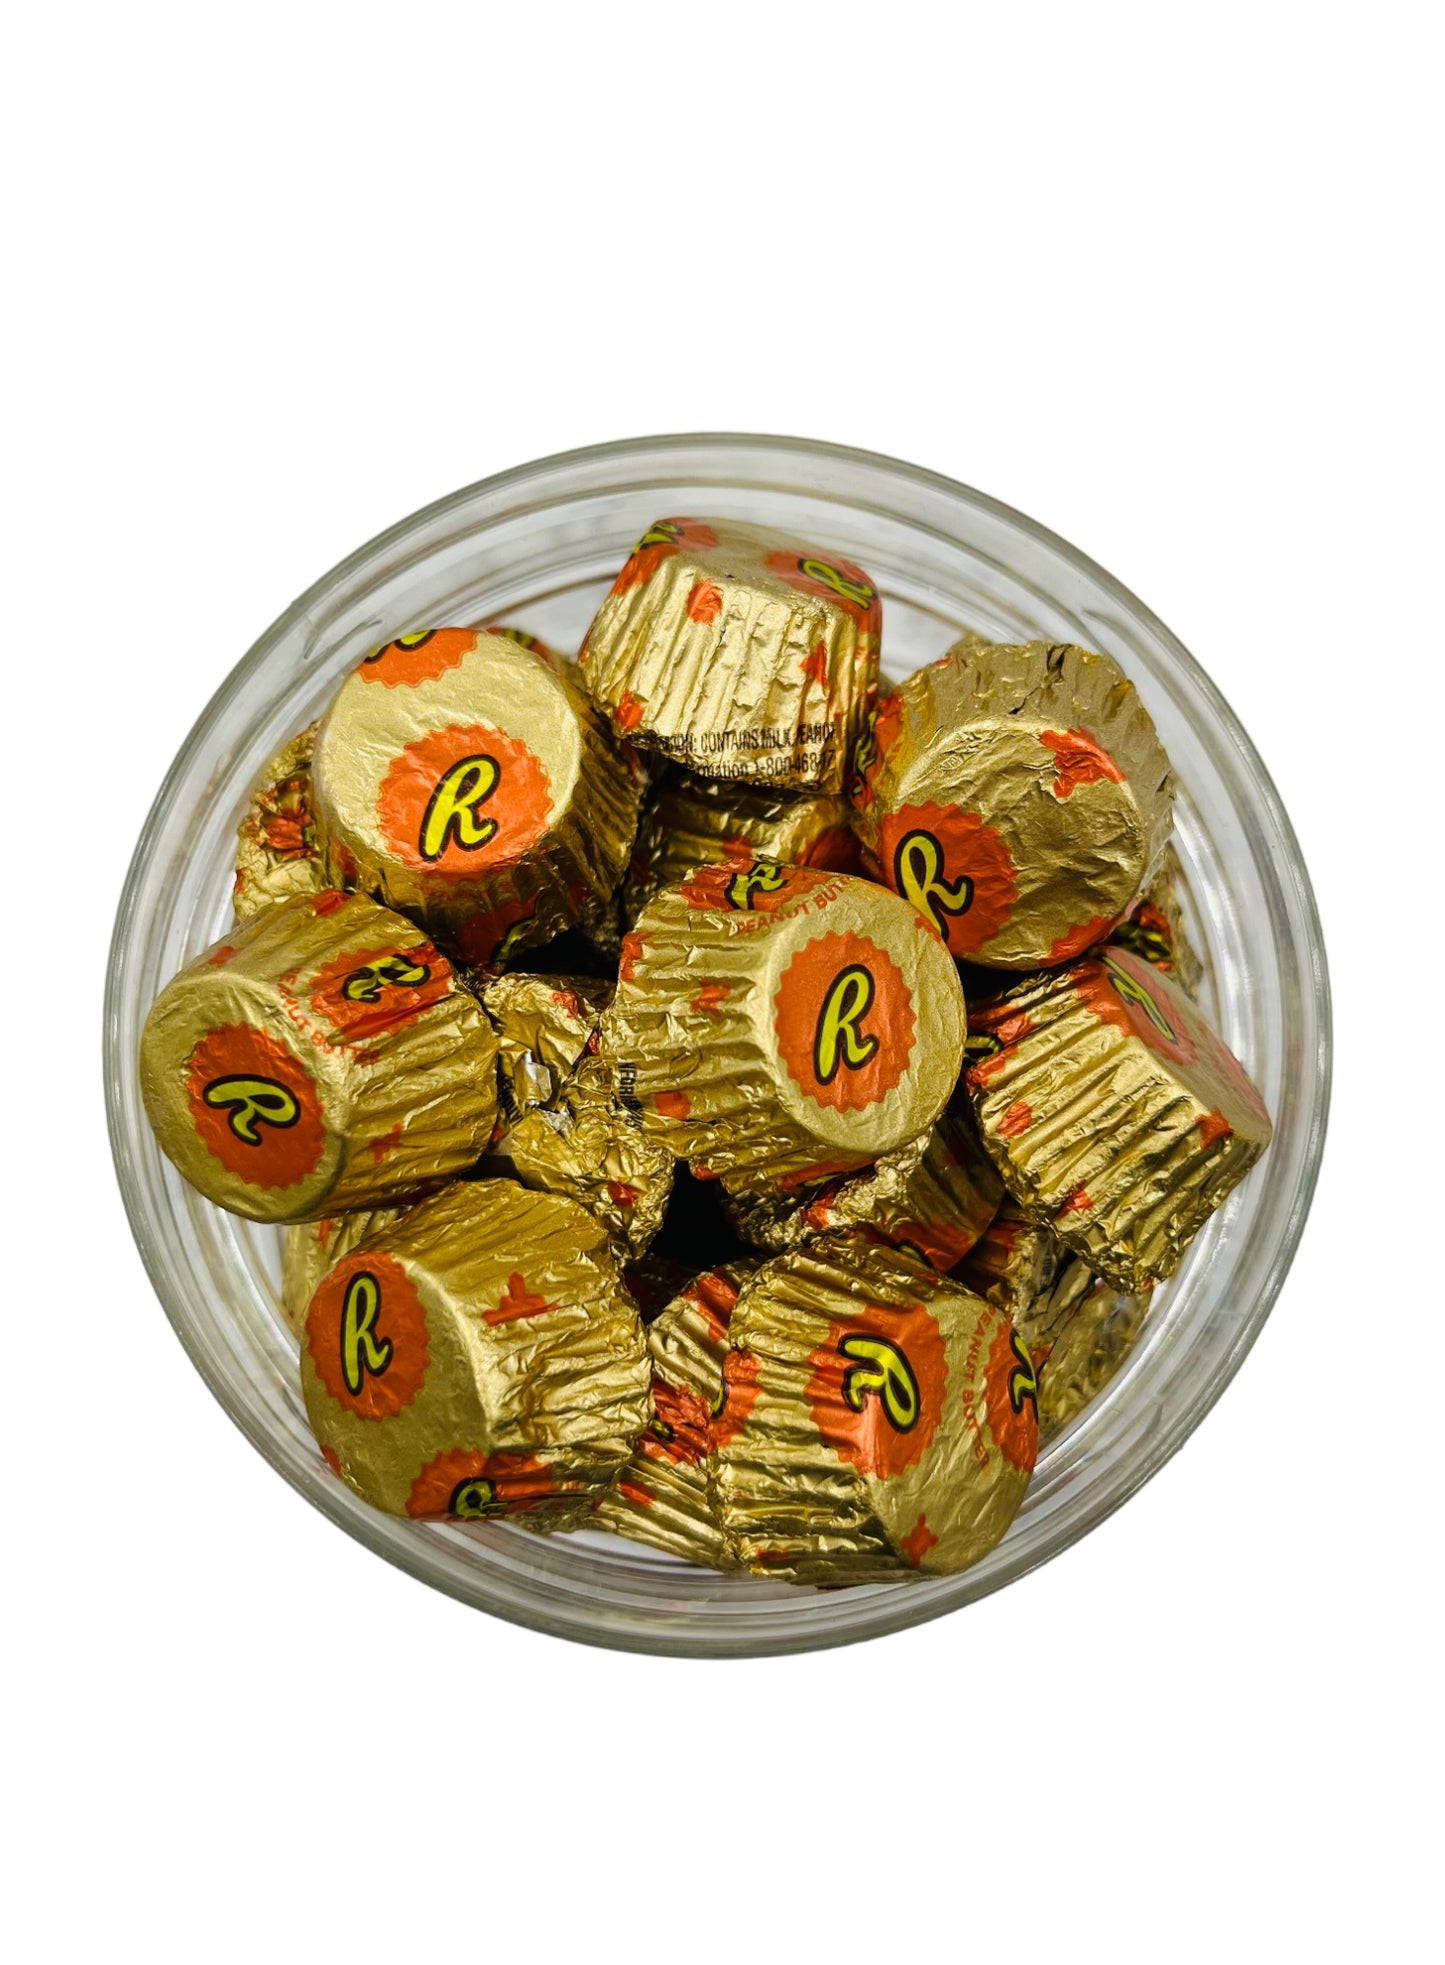 Simway Sweets Jar 755g - Reese's Peanut Butter Cups - Individually Wrapped American Chocolate - Approximately 70 Pieces